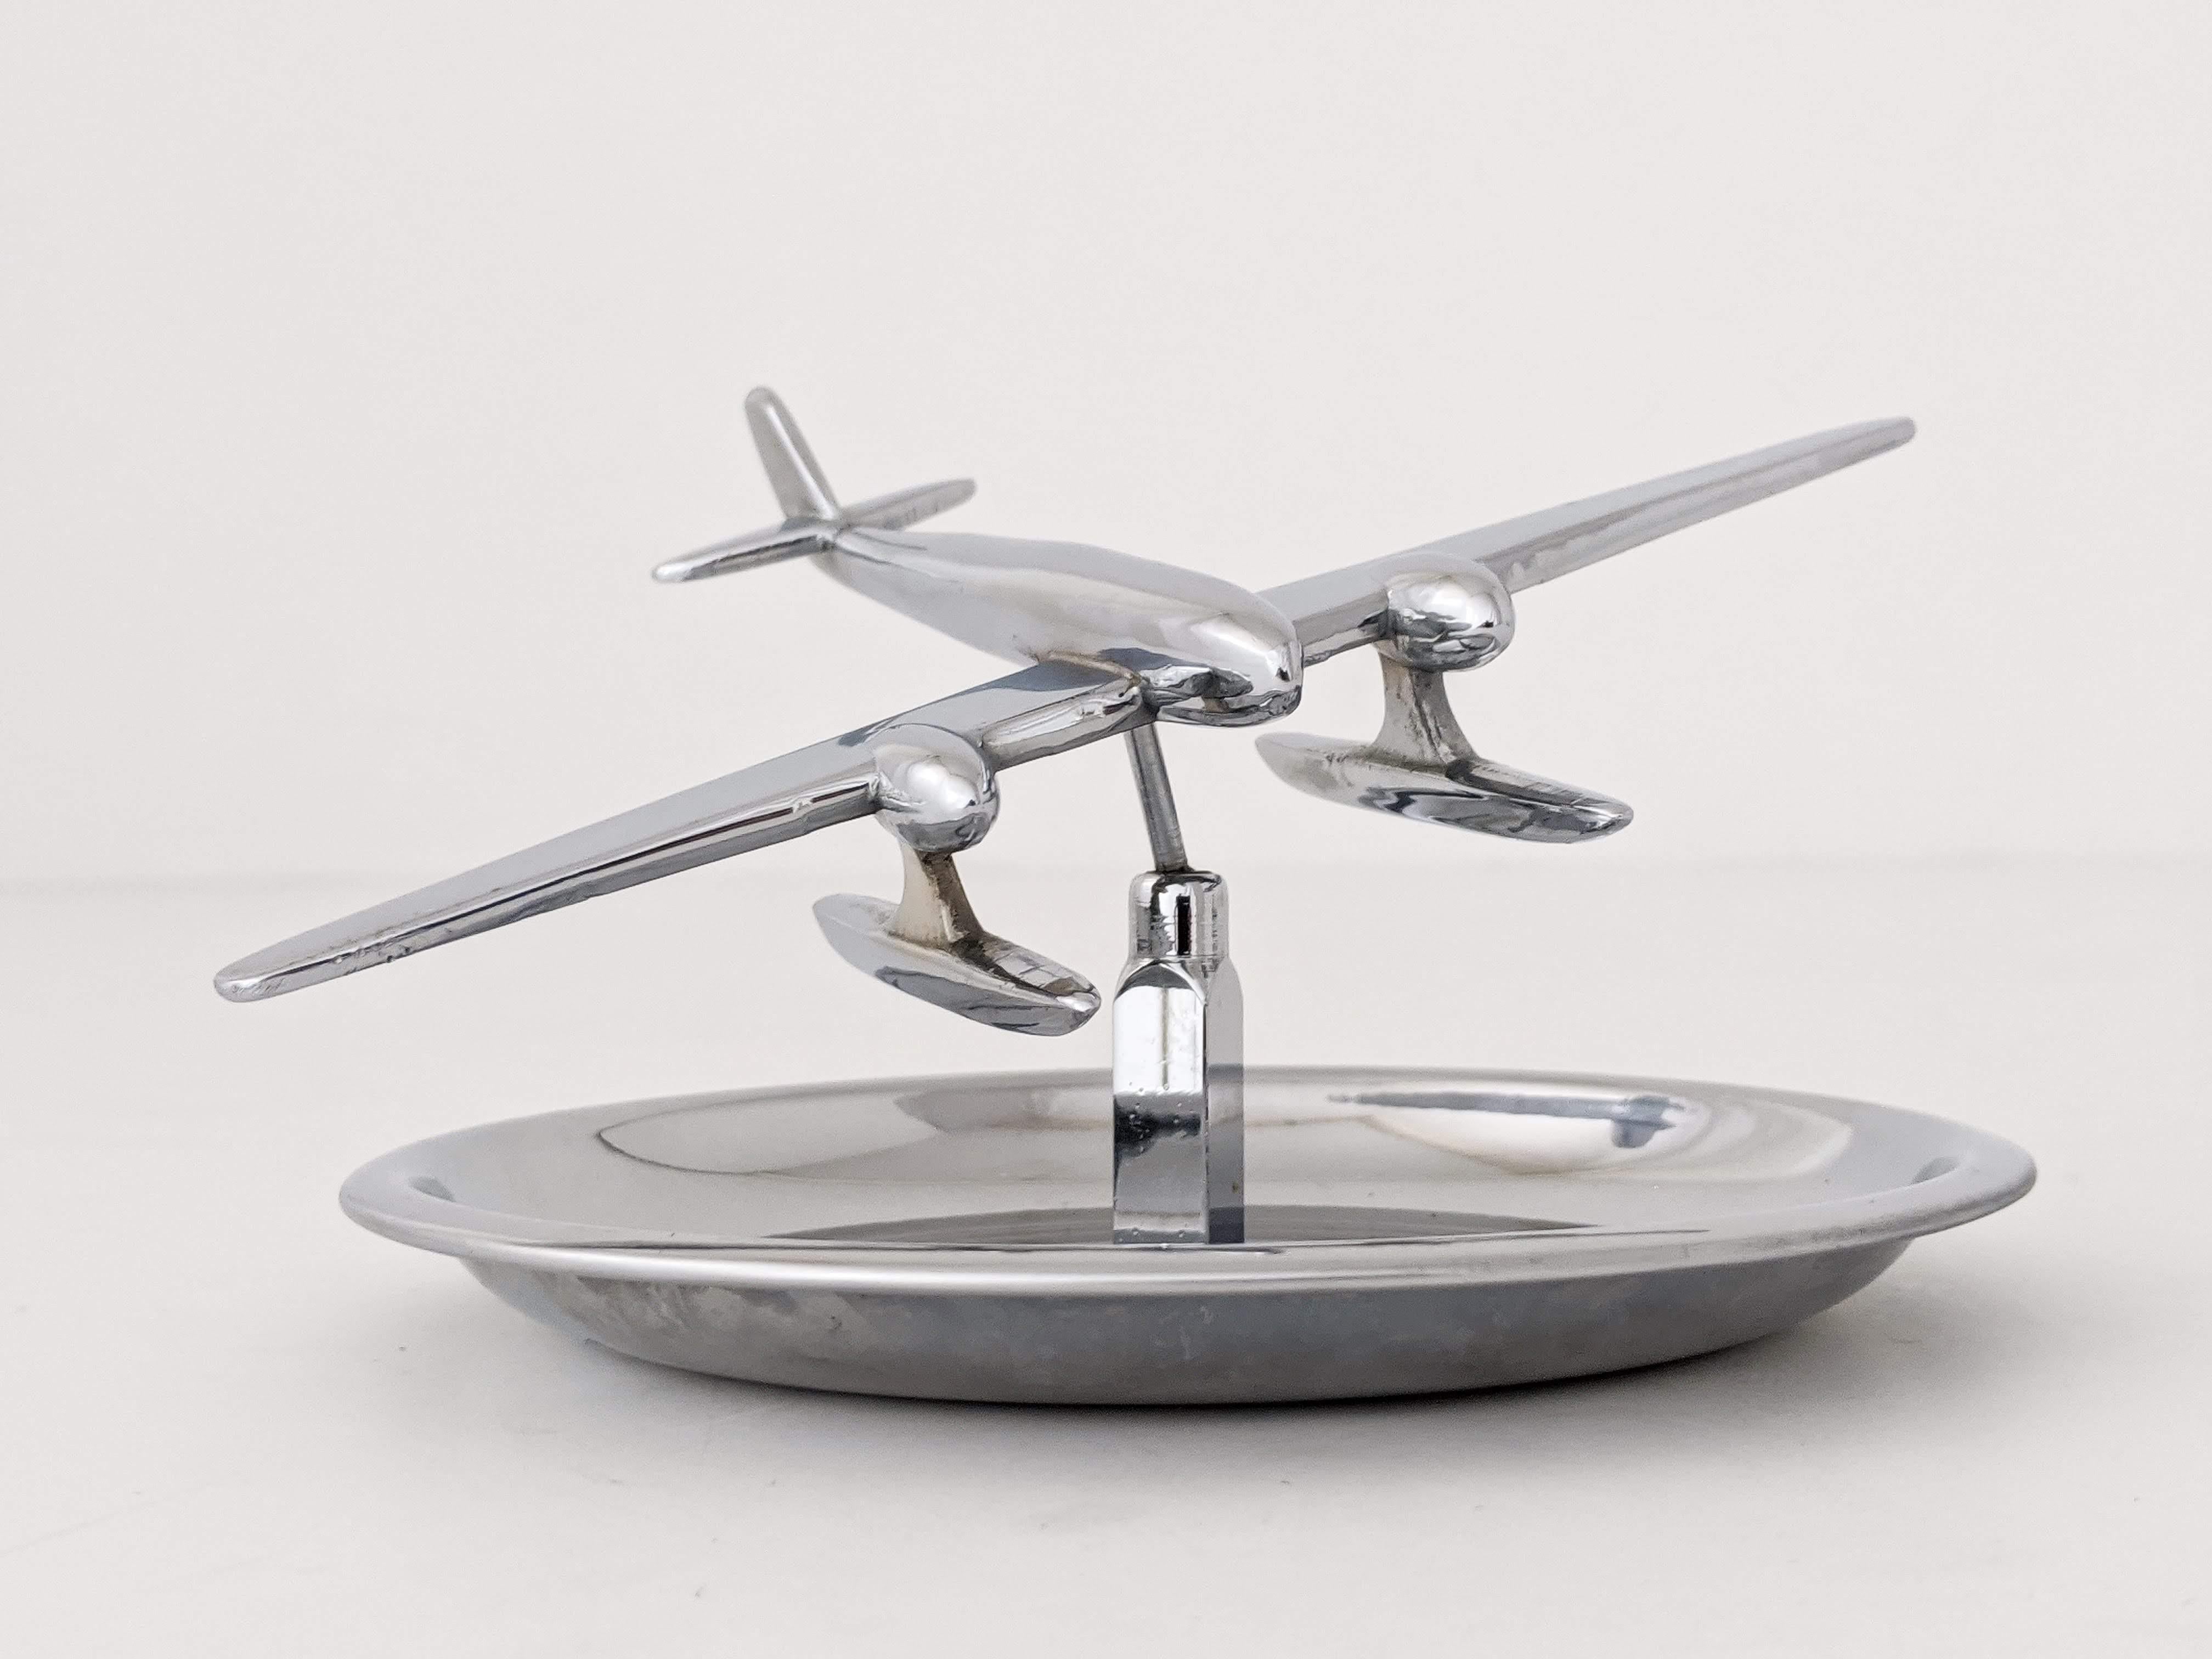 Art deco float/sea/hydro plane vide poche or empty pocket tray made of chromed brass. 

Plane pivot in all direction. 

Measures: 6.5 in. wide by 2.5 in. high.